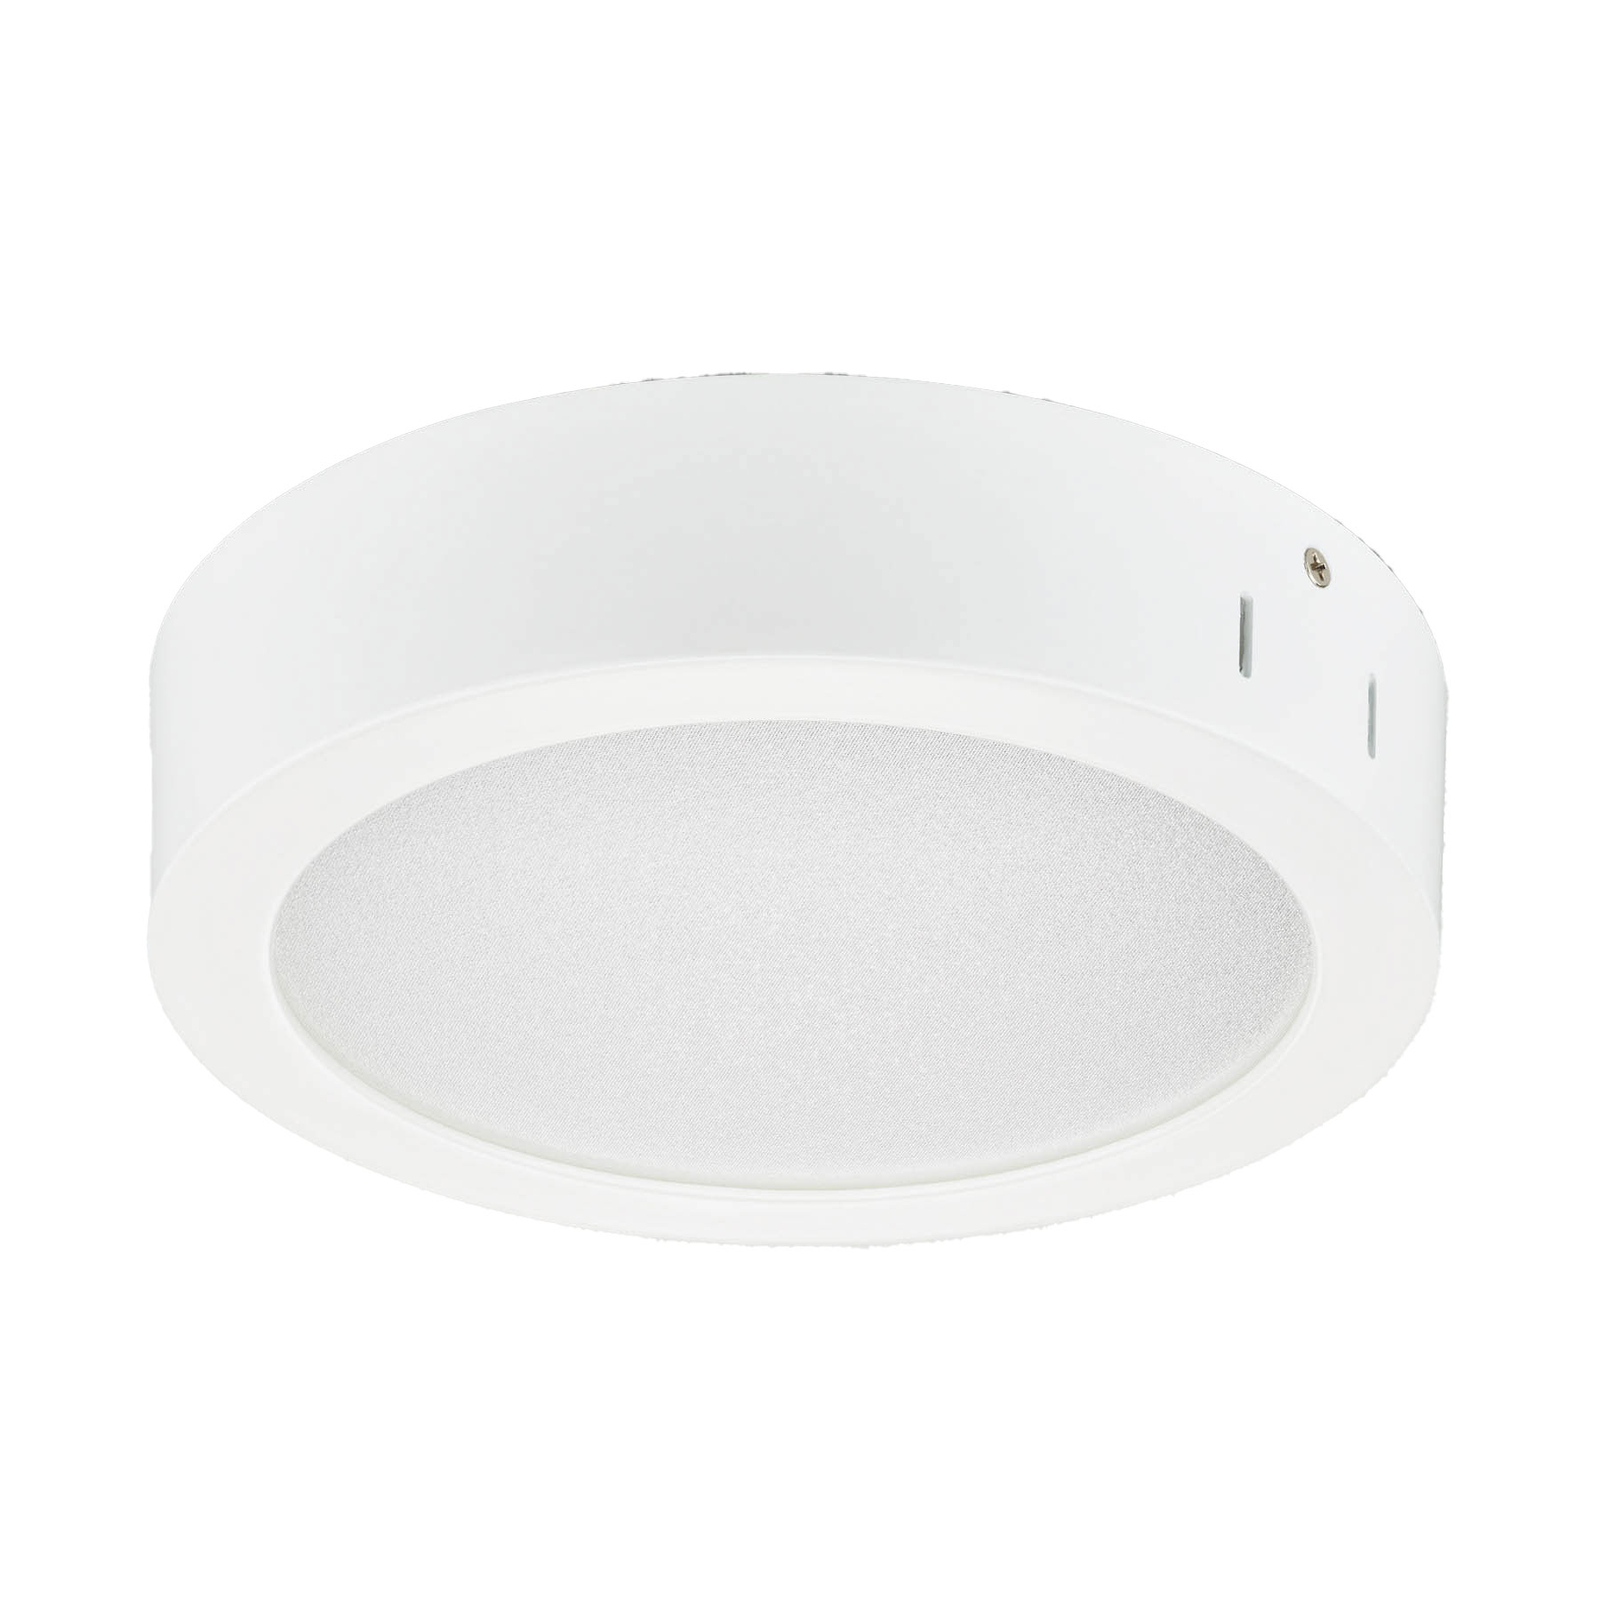 Surface-mounted LED downlight DN145C LED20S/840 PSU II WH